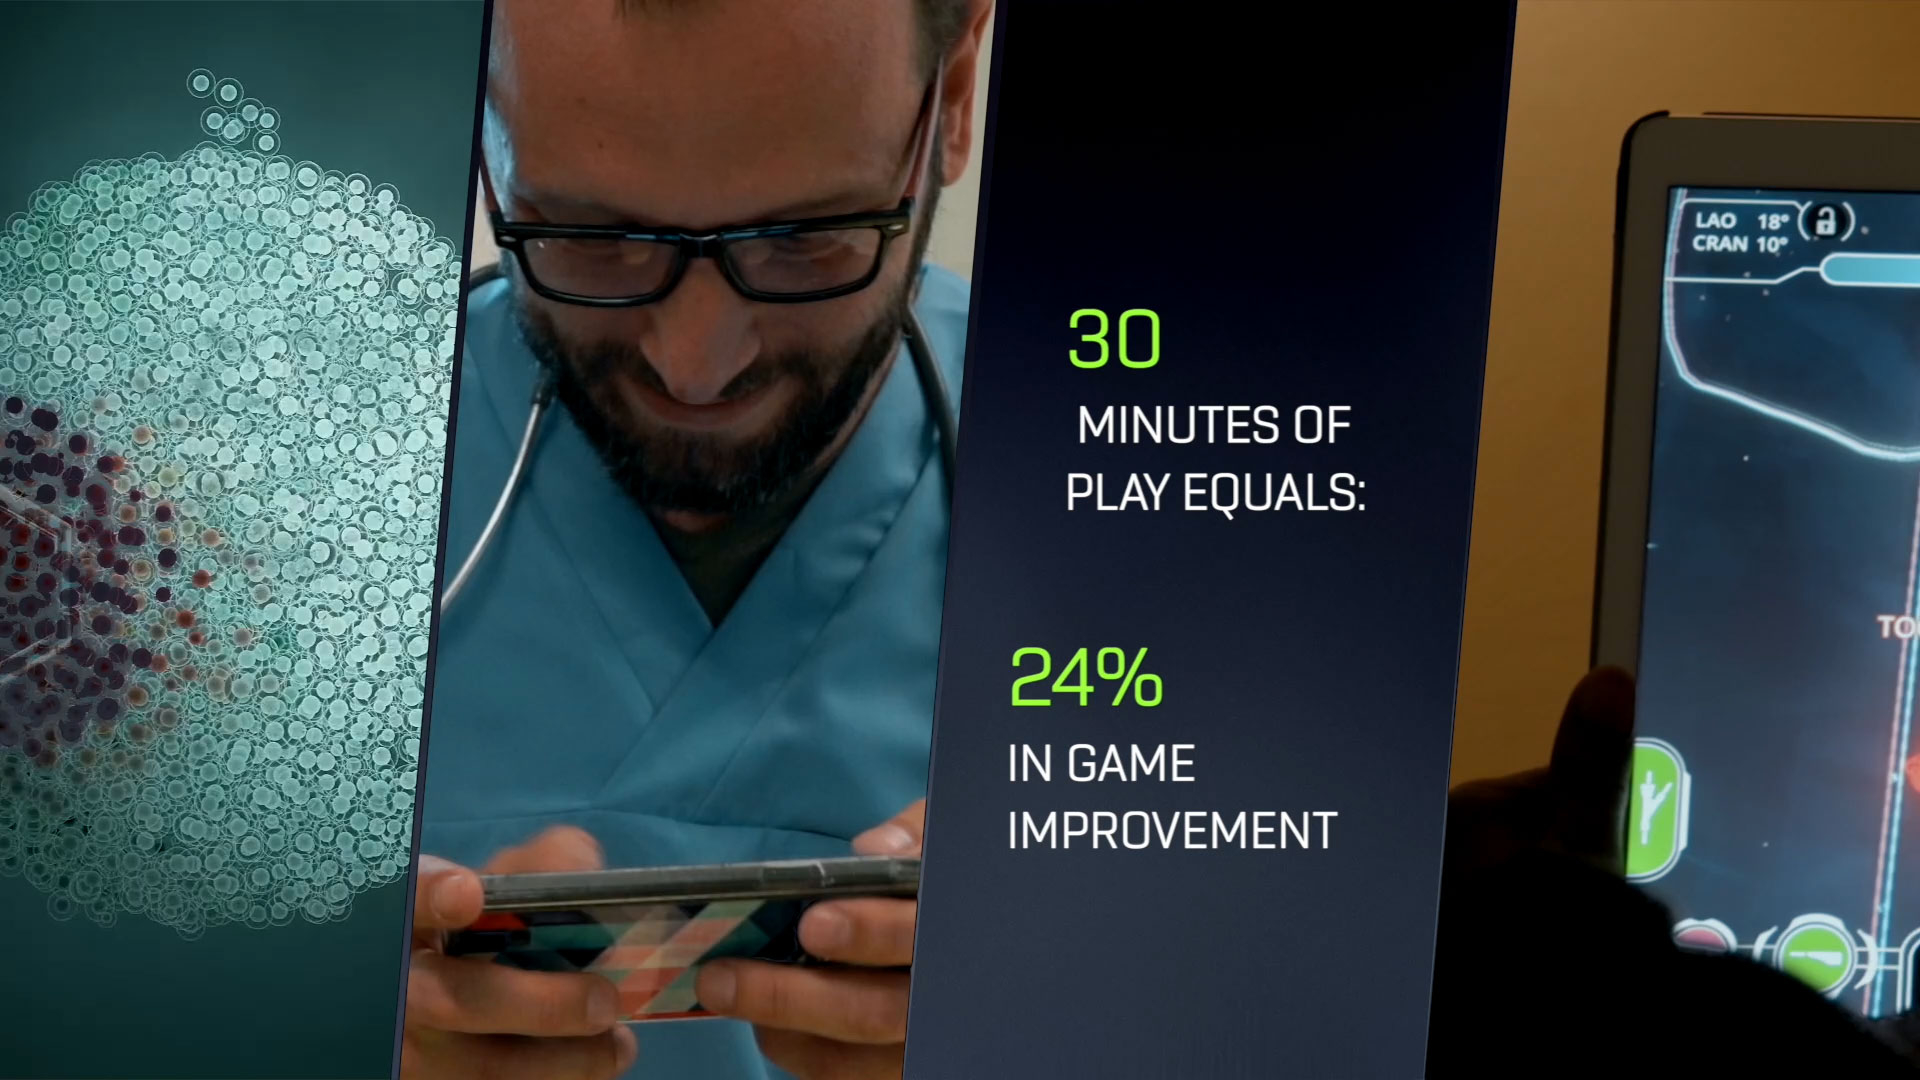 New Groundbreaking Study Finds Medical Video Games Improve Decision Making in Highly Experienced Doctors